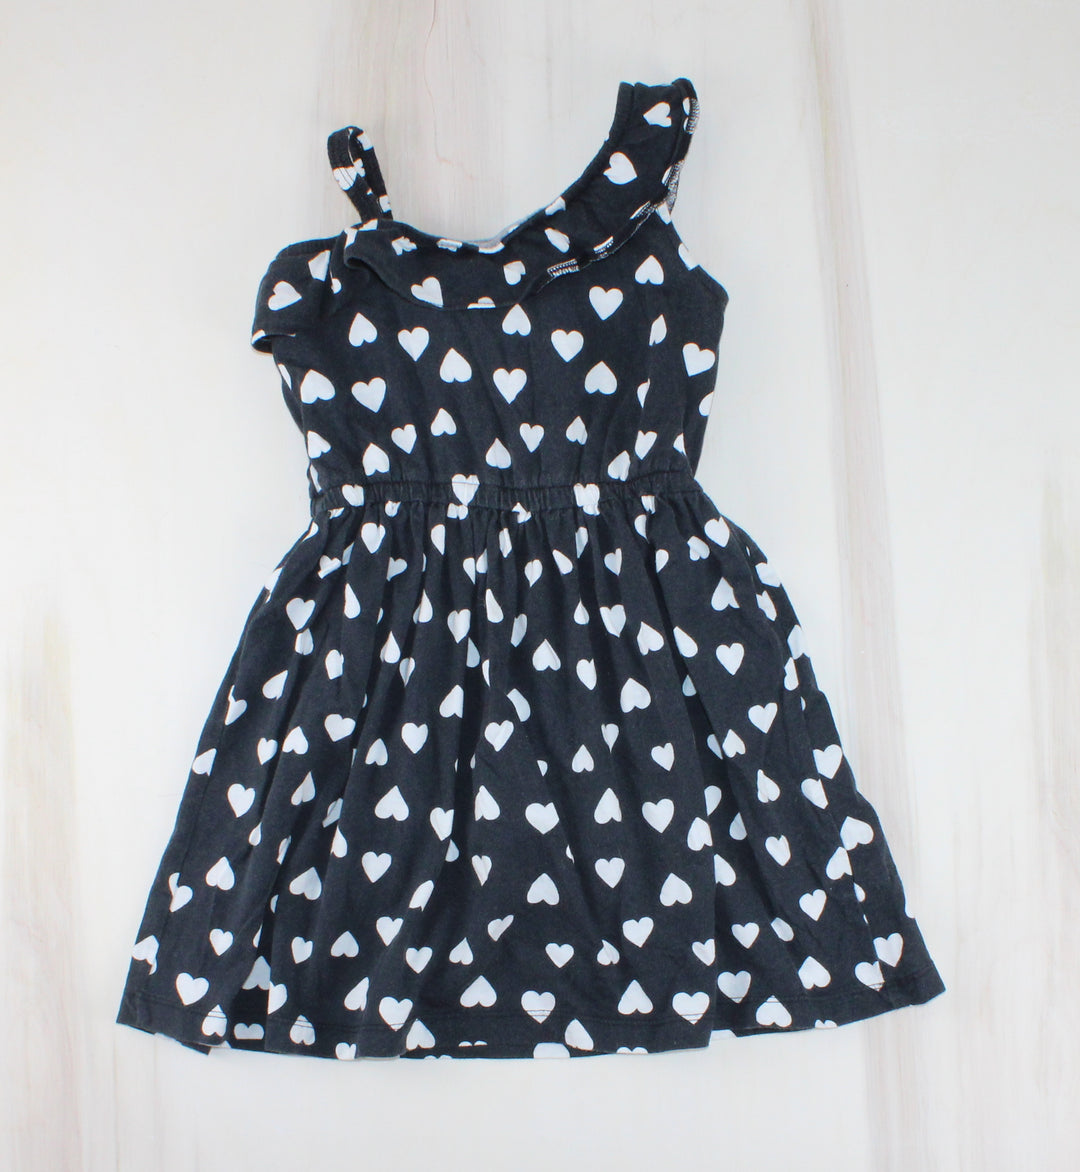 CARTERS BLACK WITH WHITE HEARTS DRESS 4-5Y VGUC